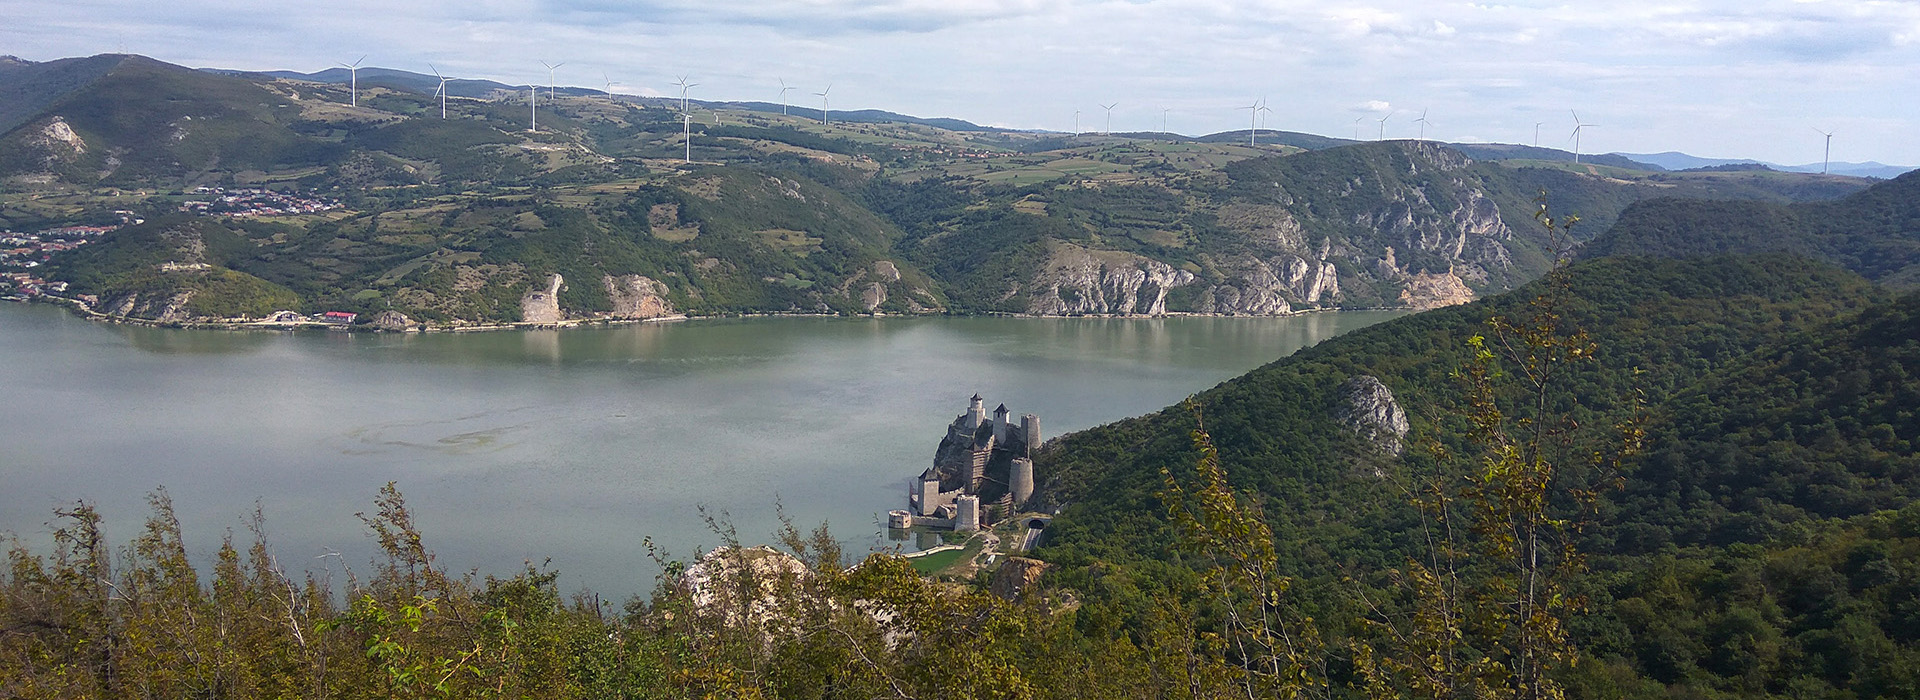 Danube Self-Guided Cycling Holiday - Golubac fortress